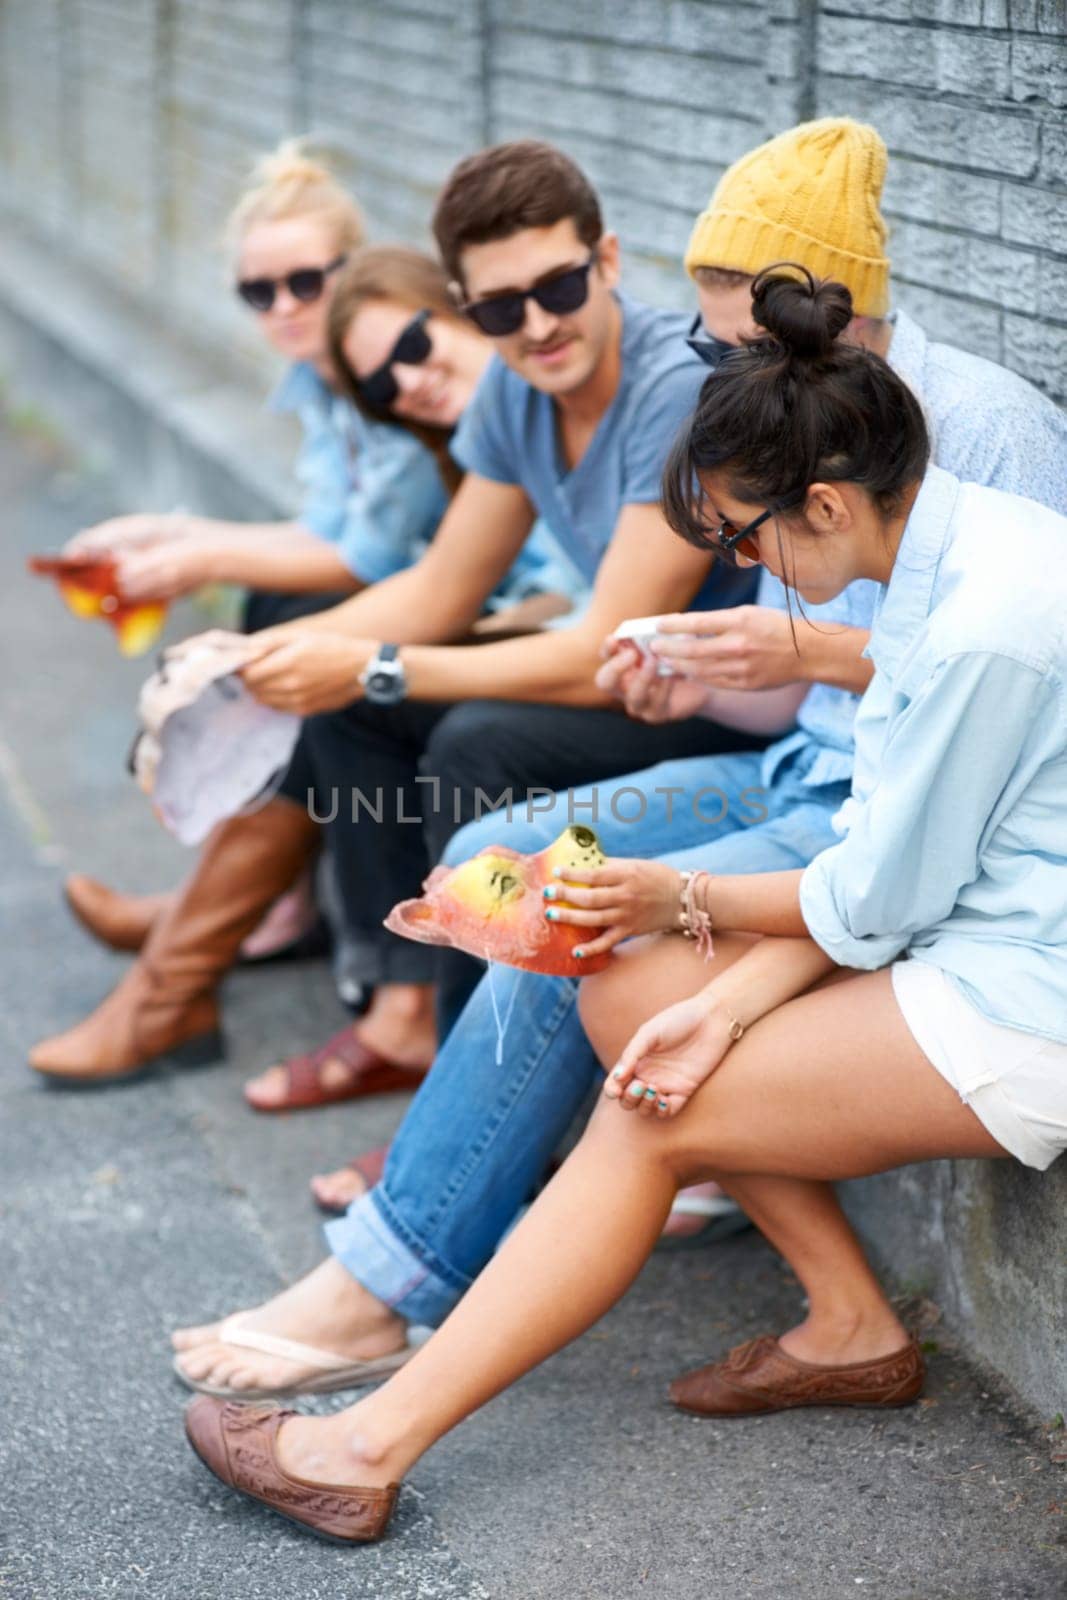 Catching up - Friends. Young hipster friends sitting together outdoors